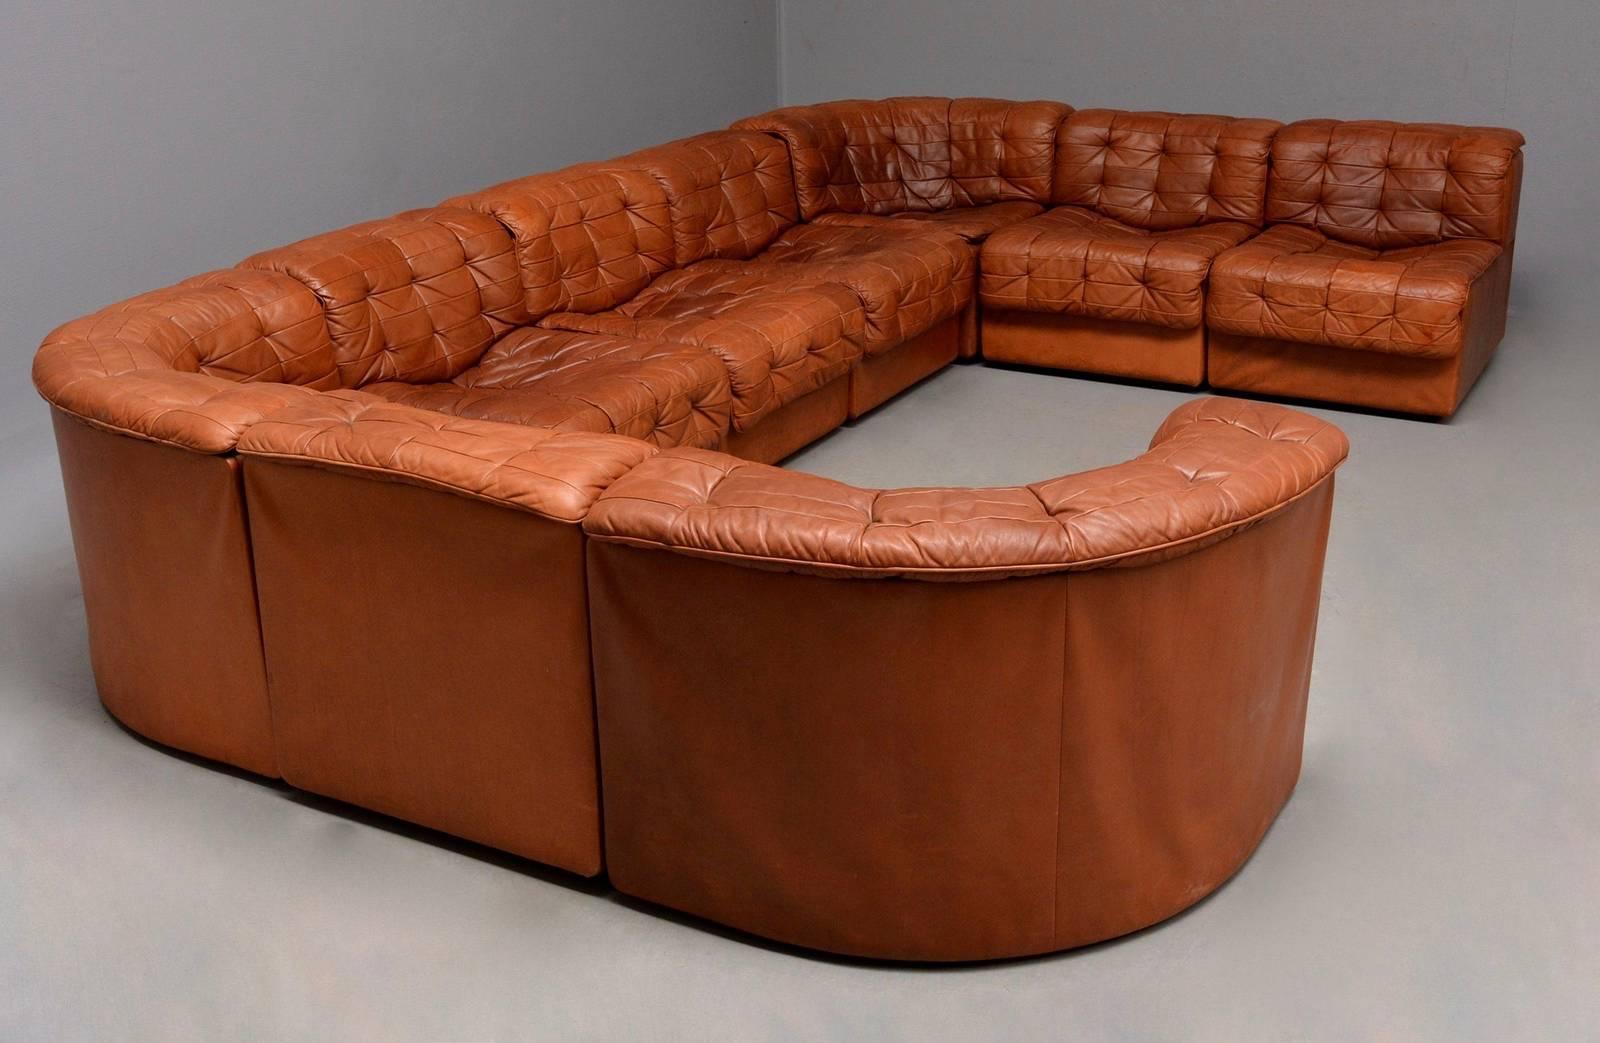 Important De sede sectional leather sofa. Rare to find with 3 corners that allow a great variety of compositions. 9 elements in excellent condition as you can see on the photos.
Each module: High 61cm, seat high: 36, width 64cm
Corner: High 61cm,